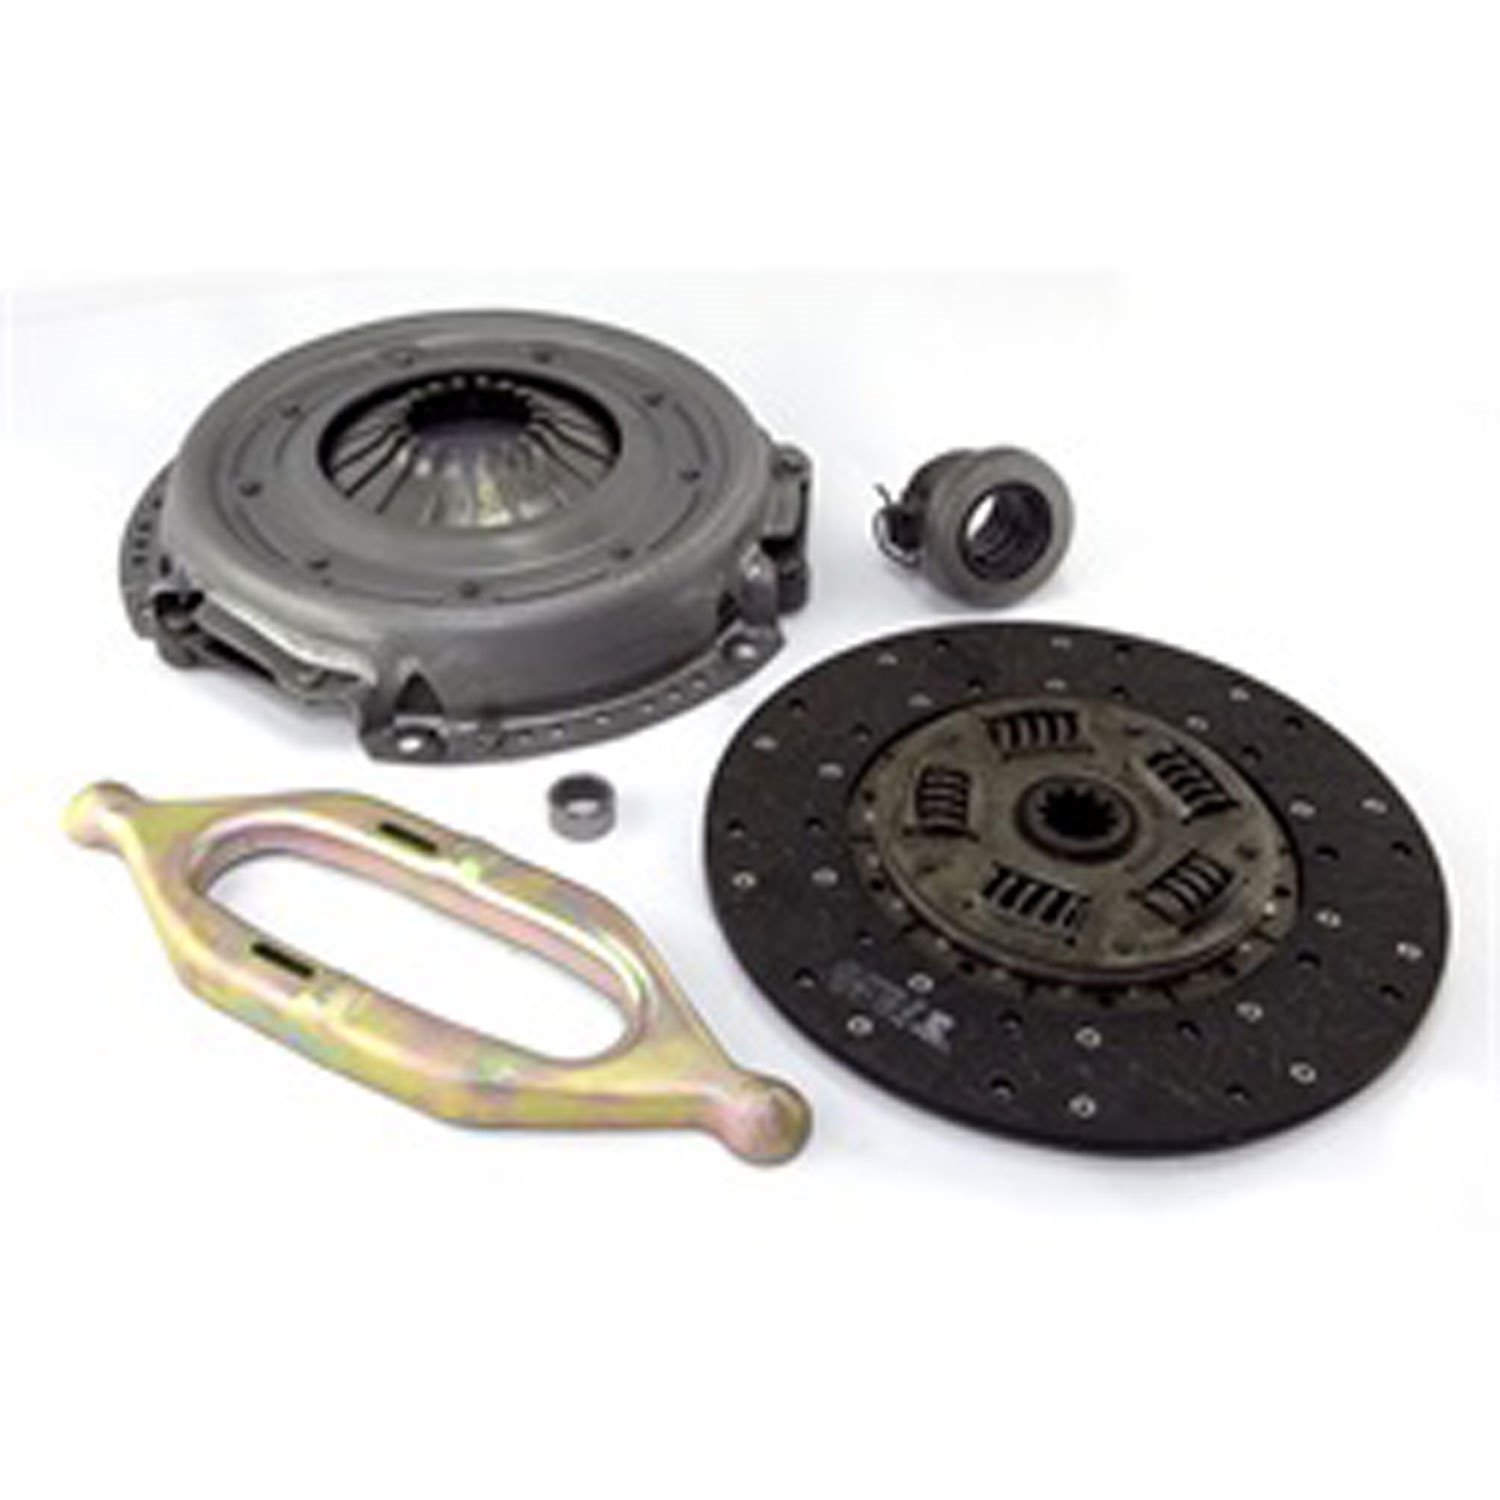 Master clutch kit 94-99 XJ and Wranglers 93-98 ZJ 4.0. Kit includes pressure plate clutch disc throw